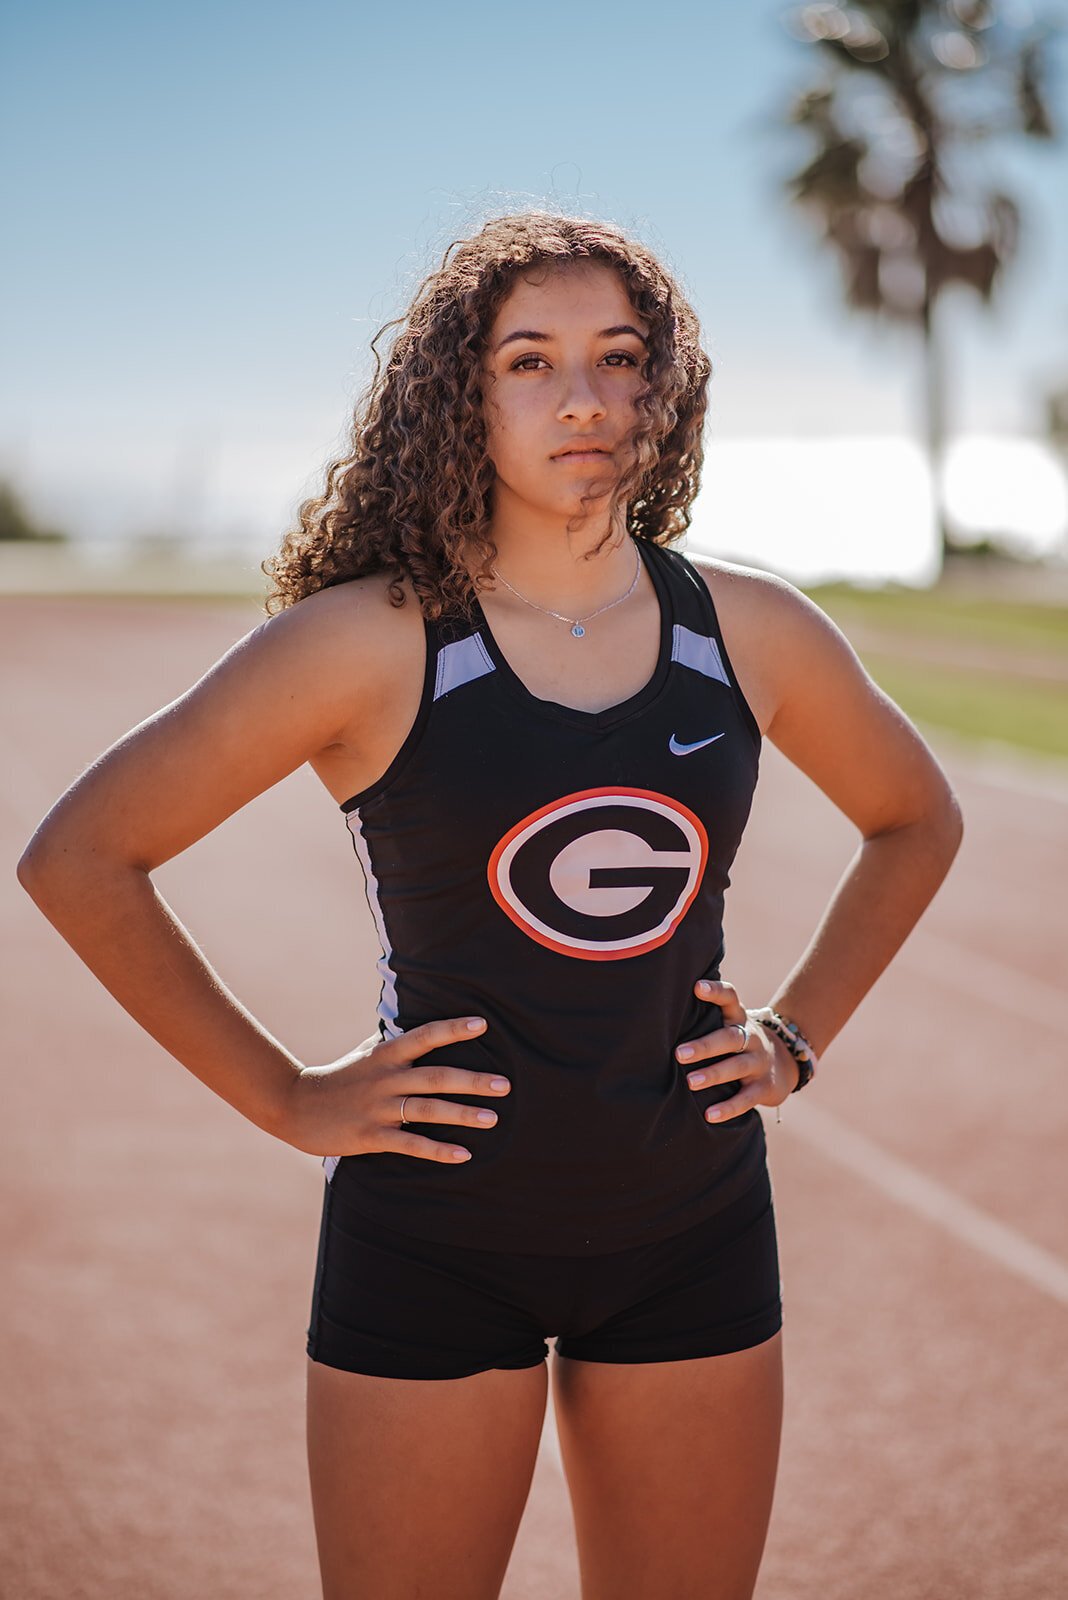 Olivia poses on a track in her running uniform for senior portraits.